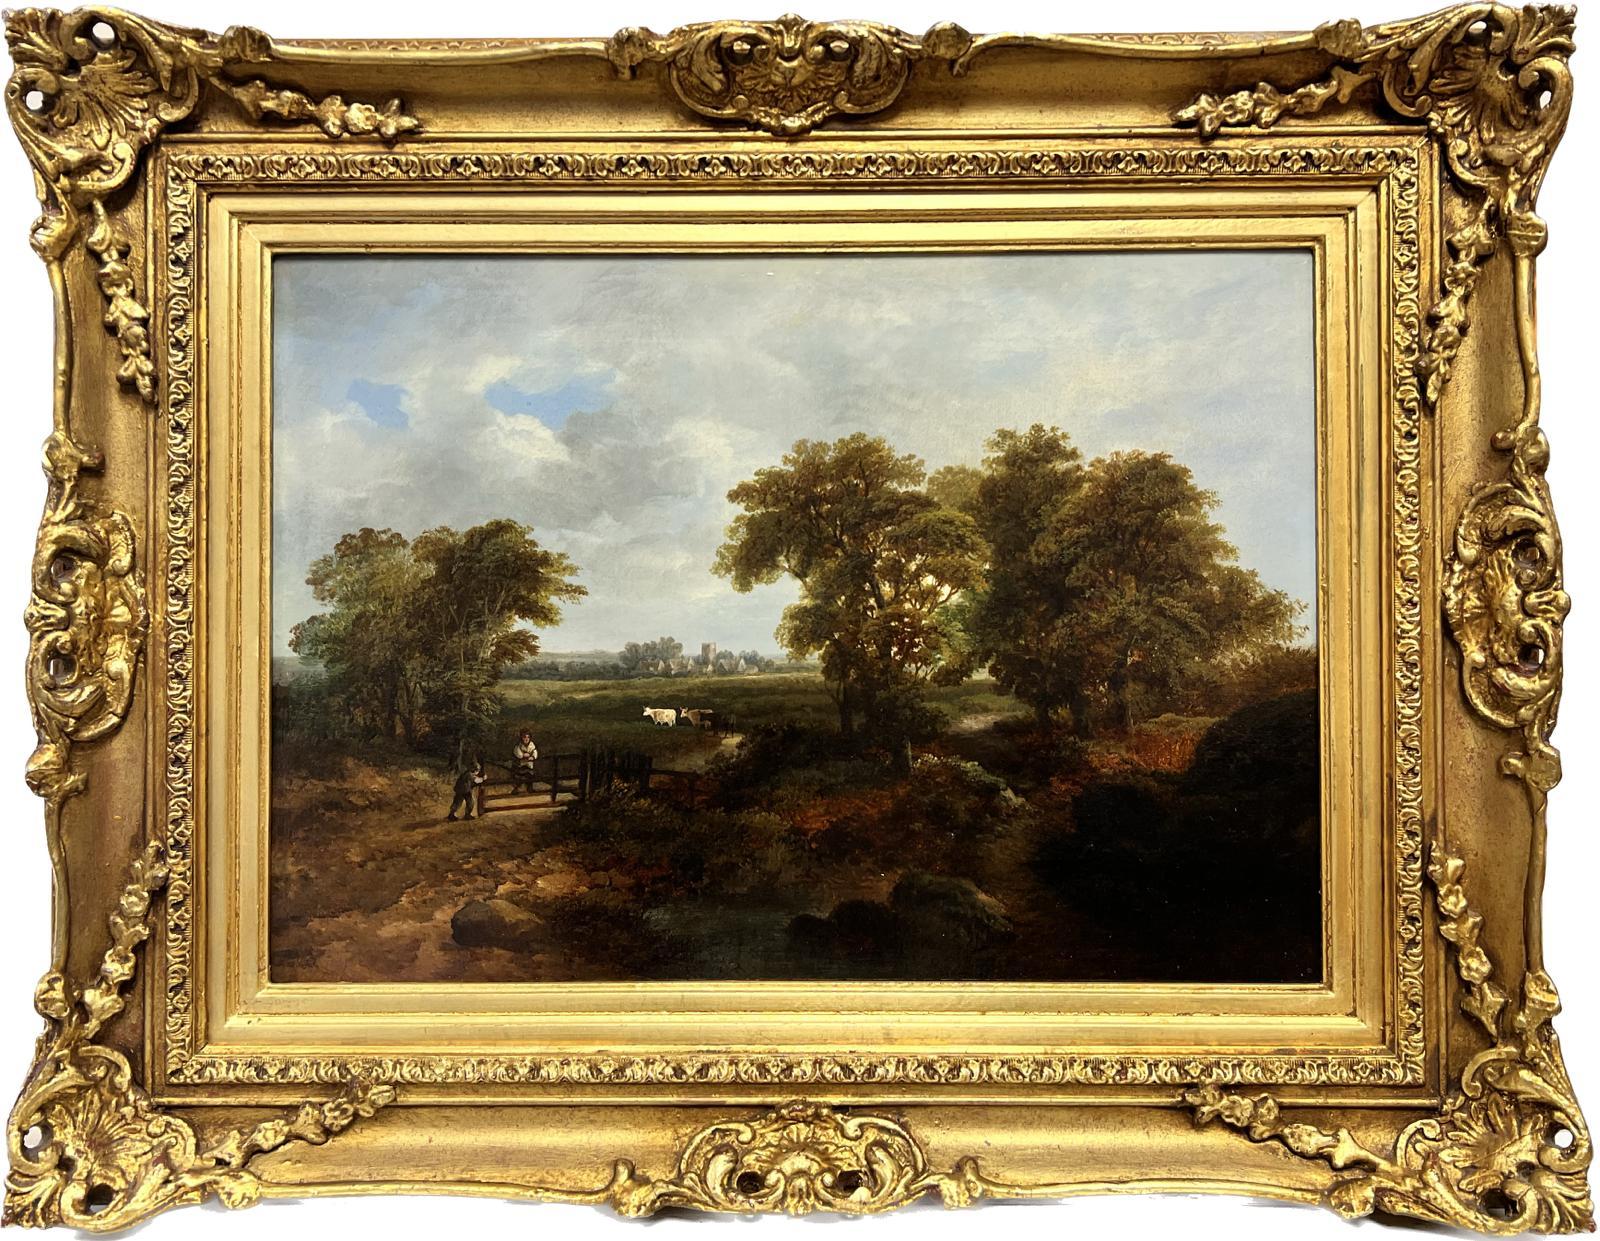 English Early Victorian Landscape Painting - Fine 1830's English Oil Painting Suffolk Rural Landscape, Very Tranquil Scene